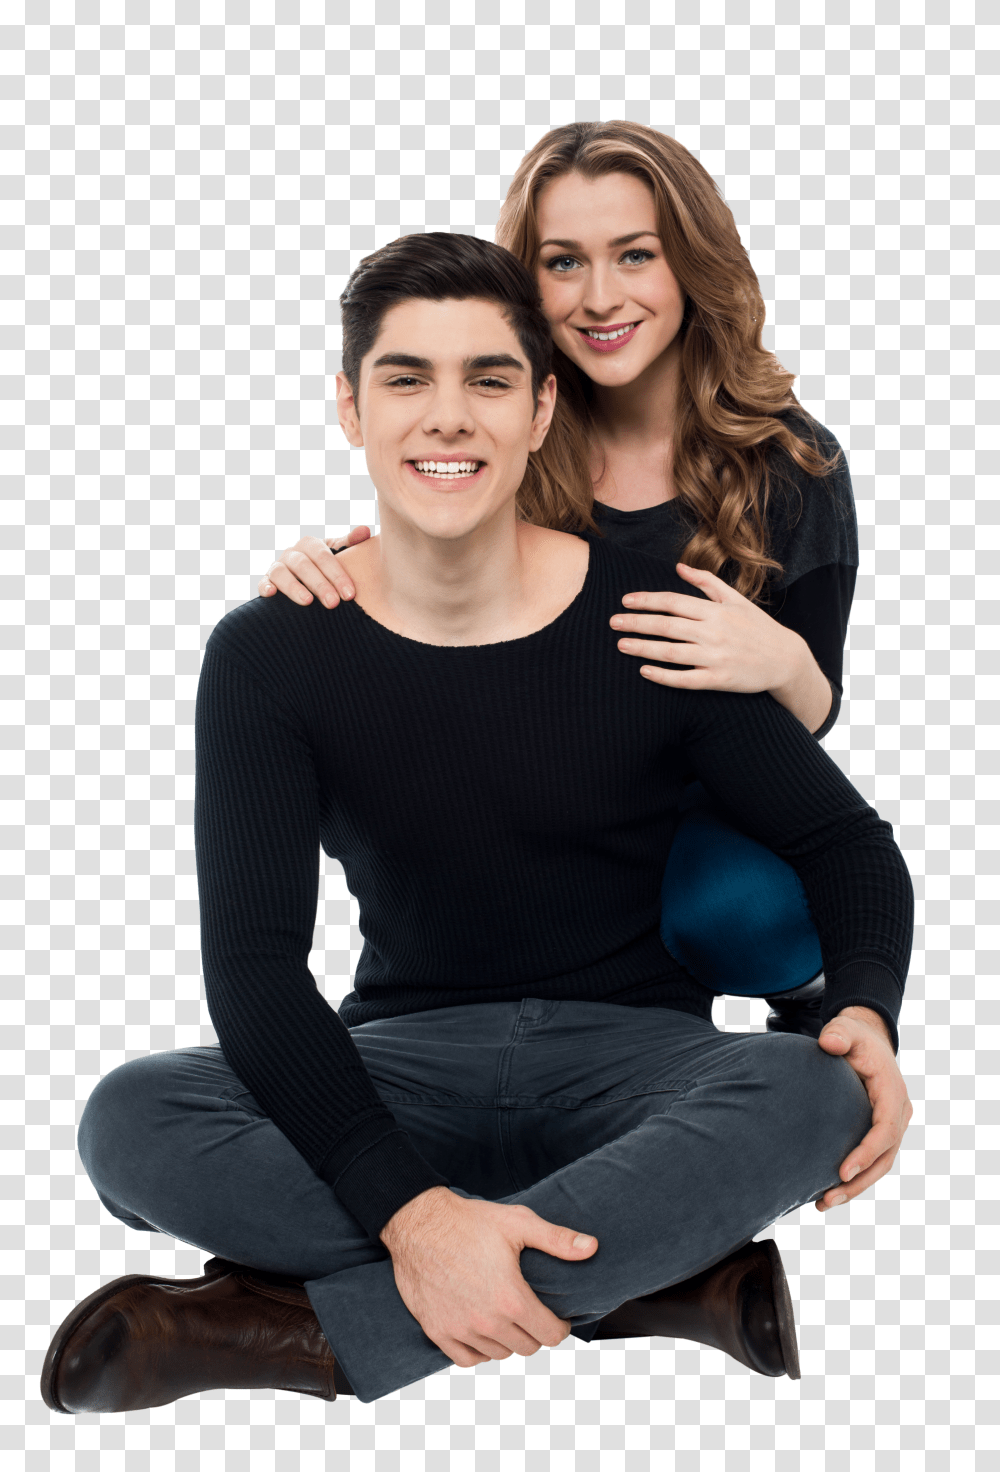 Download Couple Image With No Transparent Png